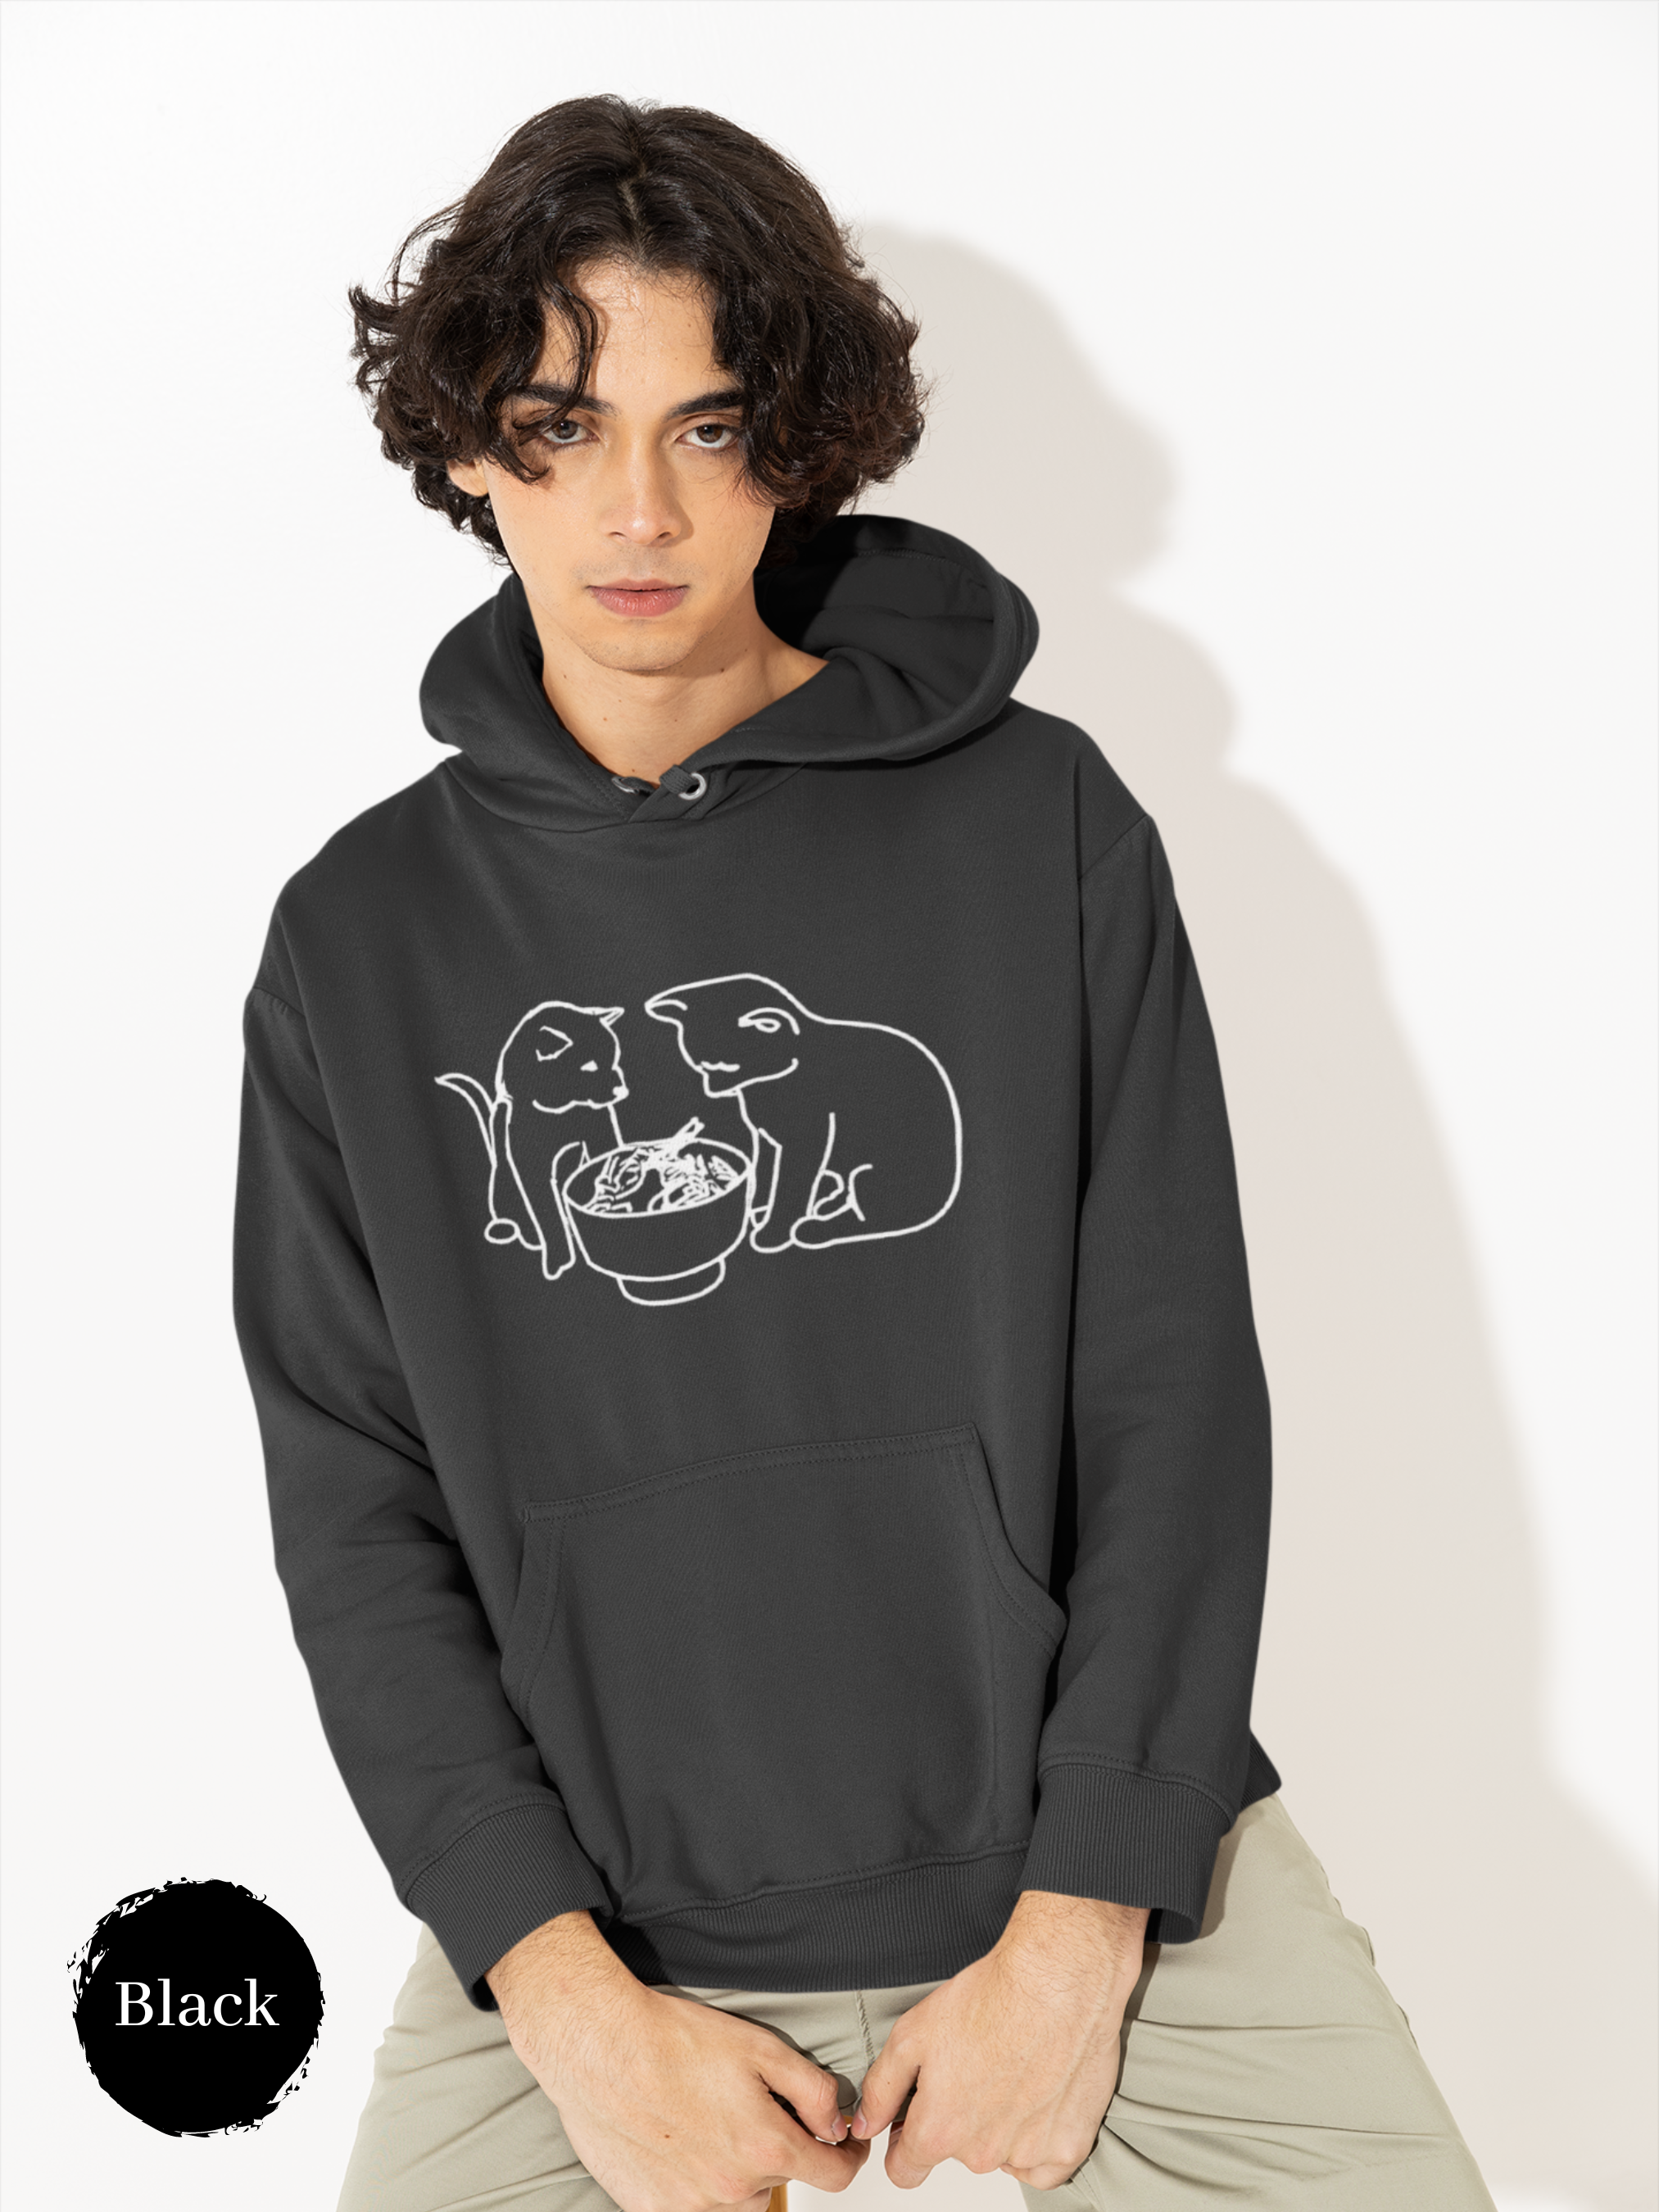 Ramen Hoodie: Noodle Gazing Duo - A Cute and Playful Asian Food Hoodie with a Pun Twist